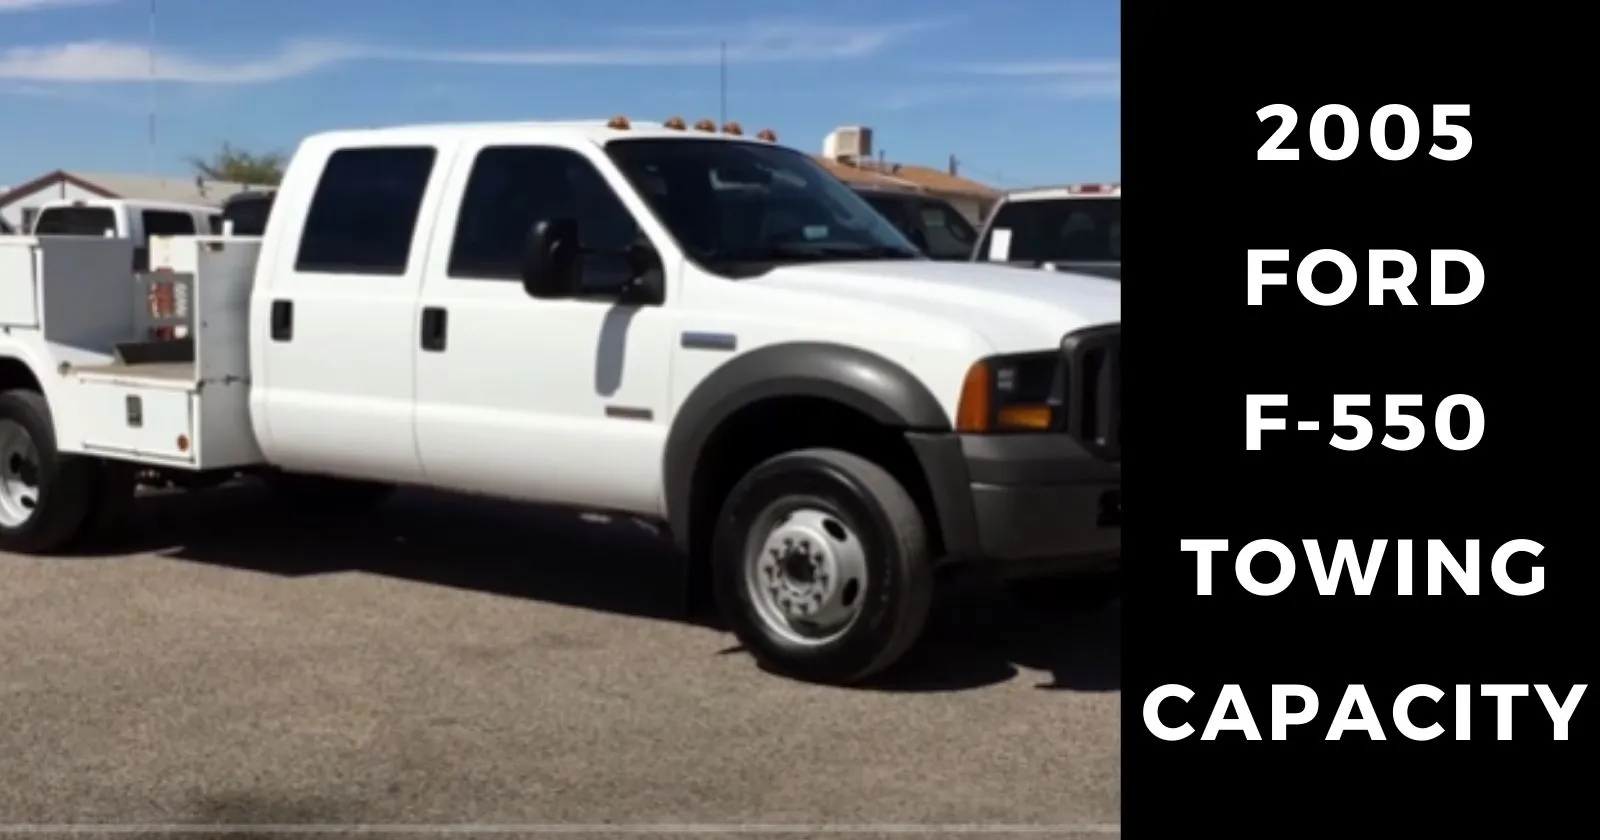 2005-ford-f550-towing-capacity-with-charts-thecartowing